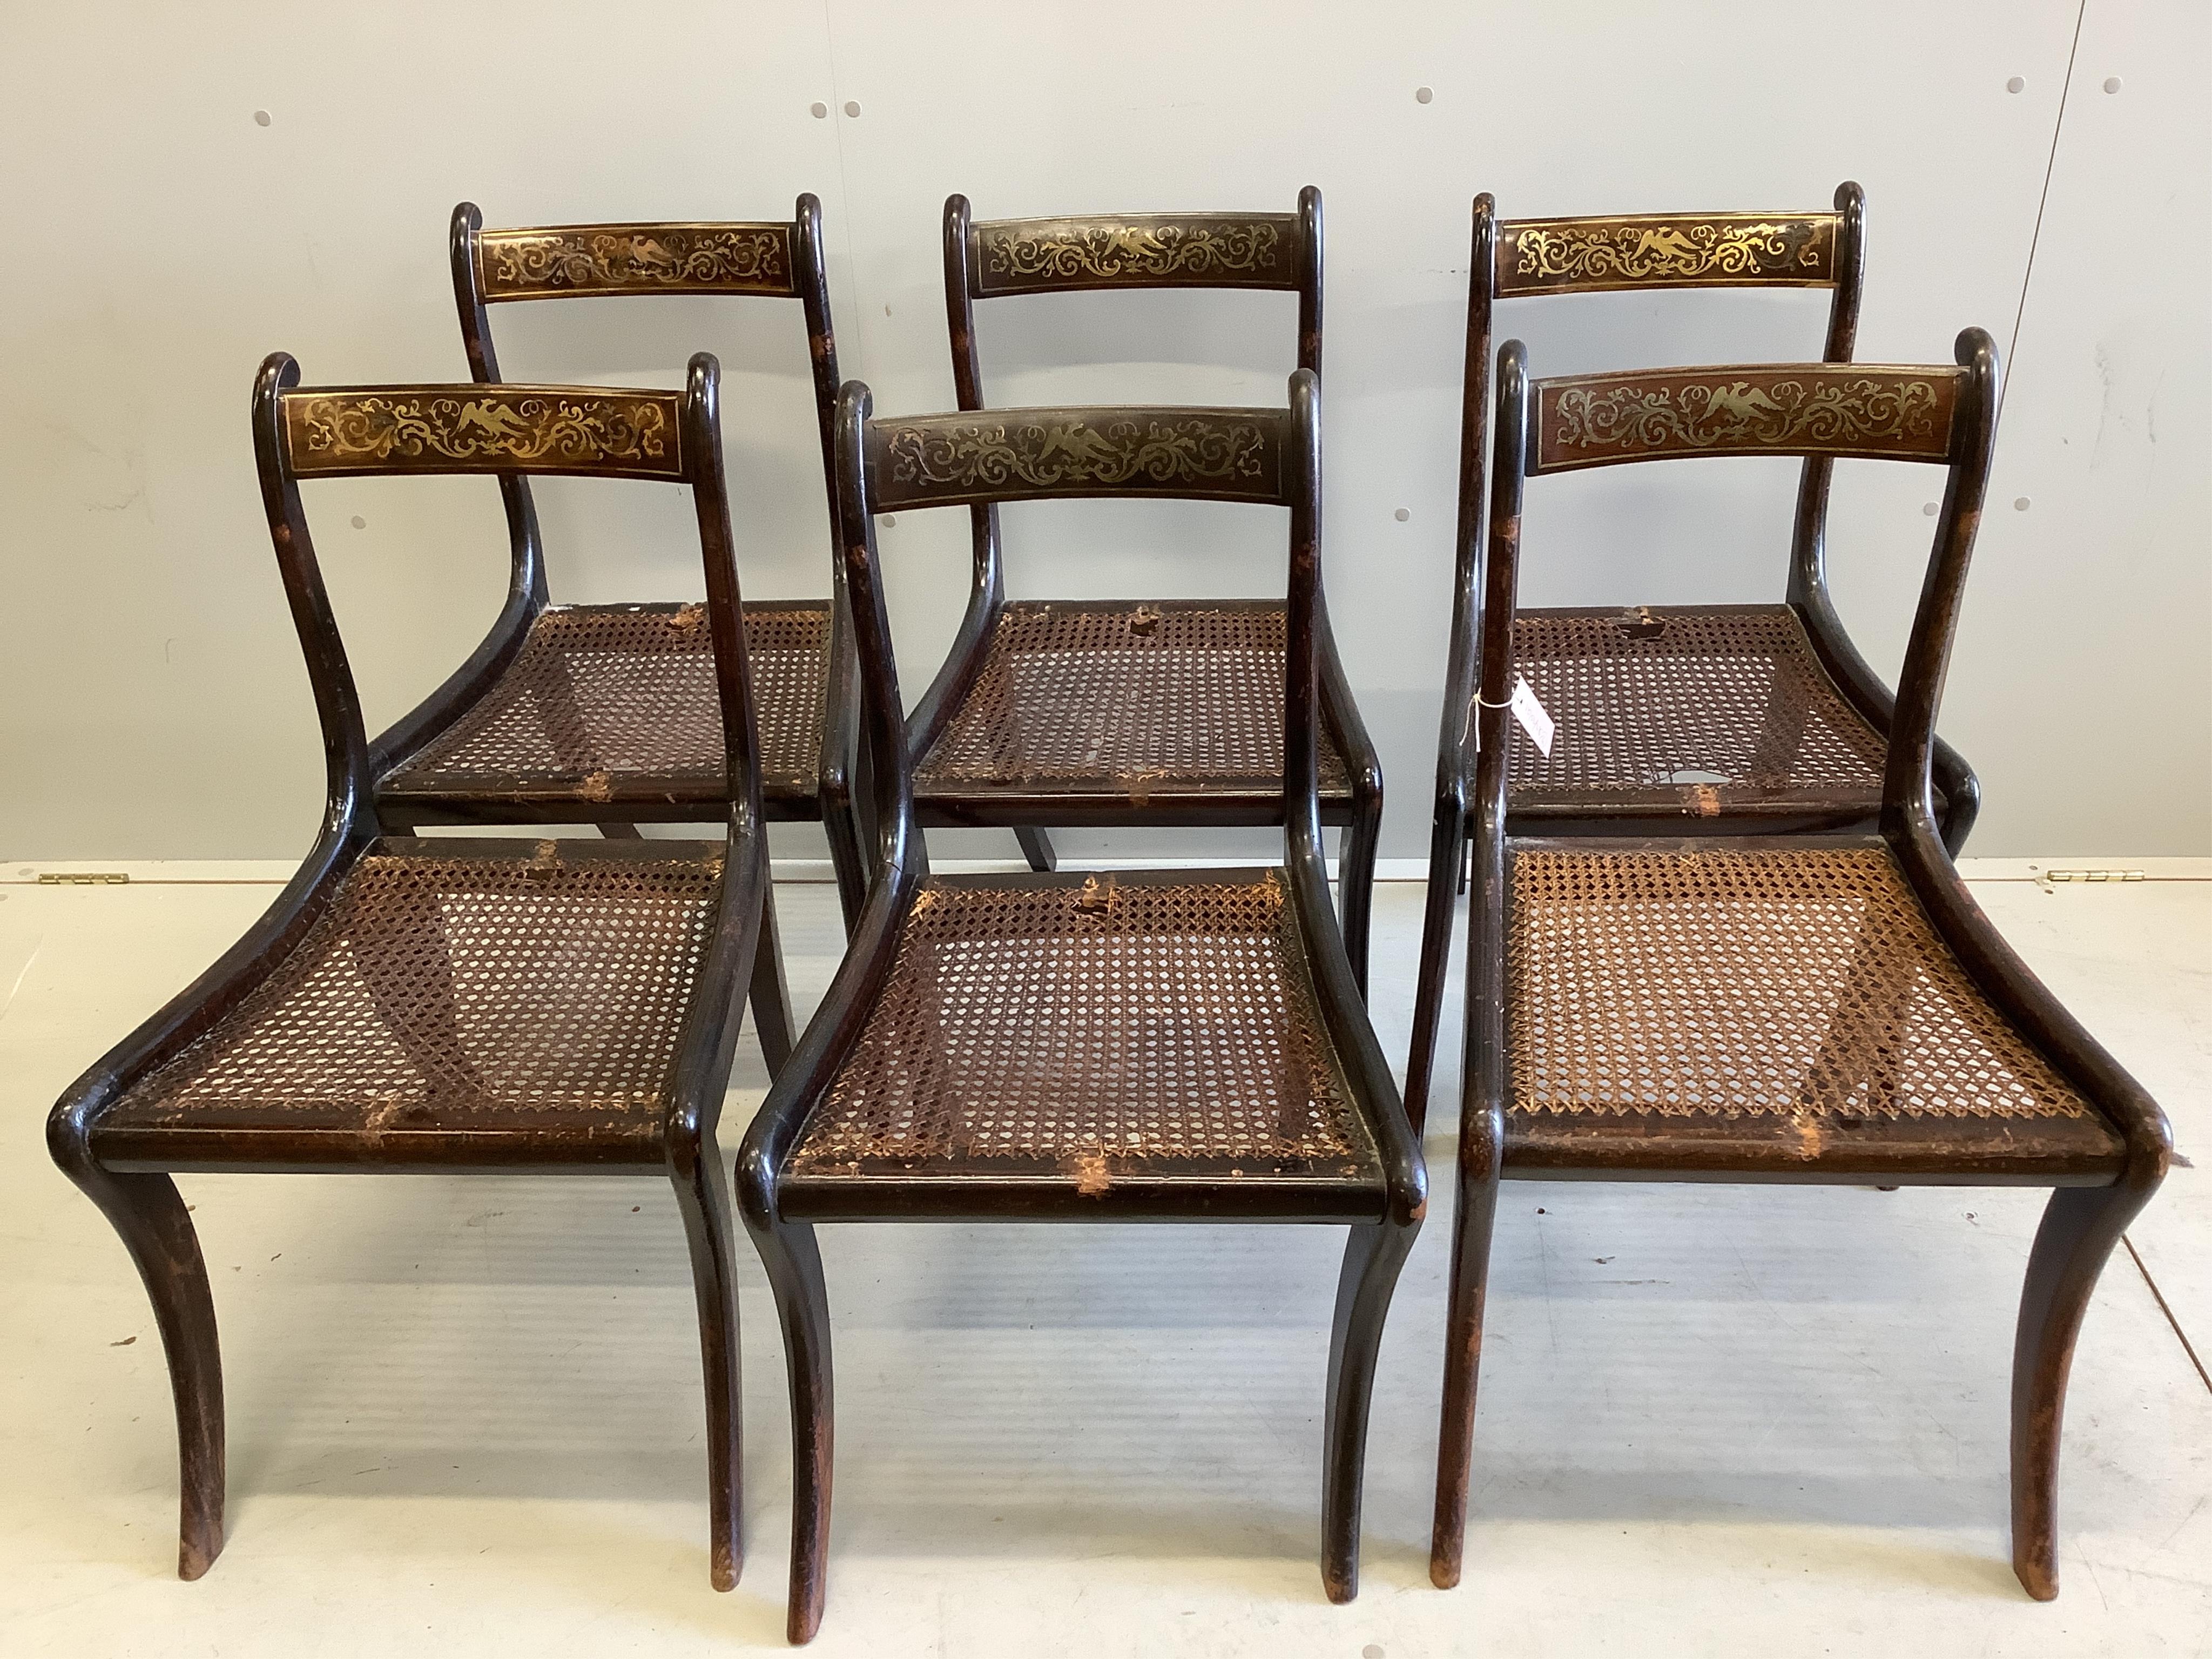 A set of six Regency rosewood and simulated rosewood dining chairs, the top rails inlaid with cut brass decoration, caned seats with slip-in cushions, on sabre legs. Condition - poor